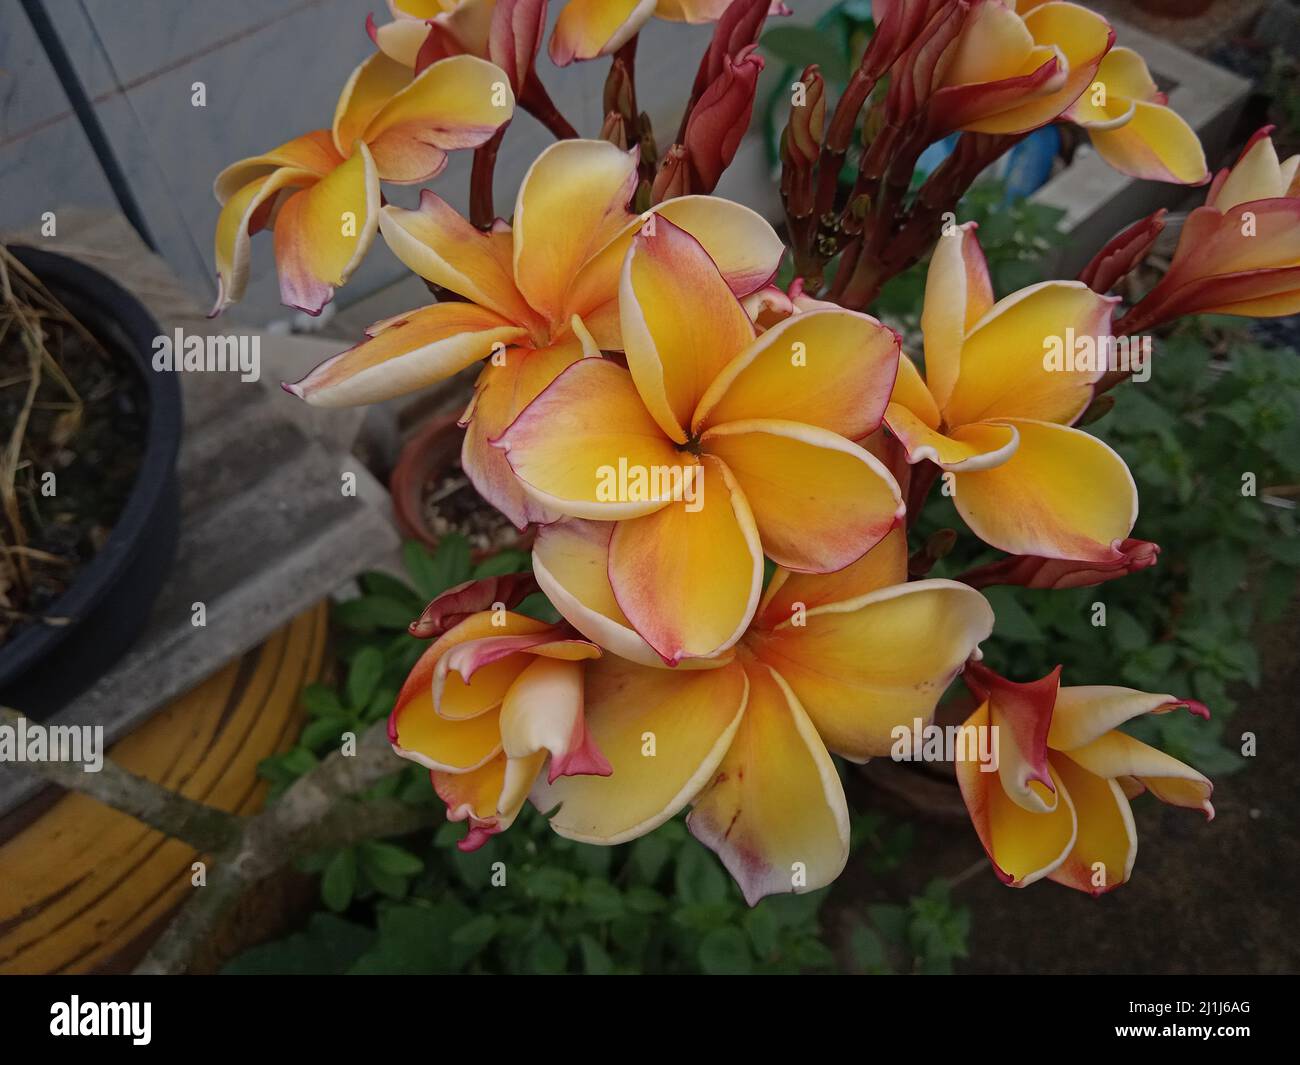 Look at the frangipani flowers in the backyard Stock Photo